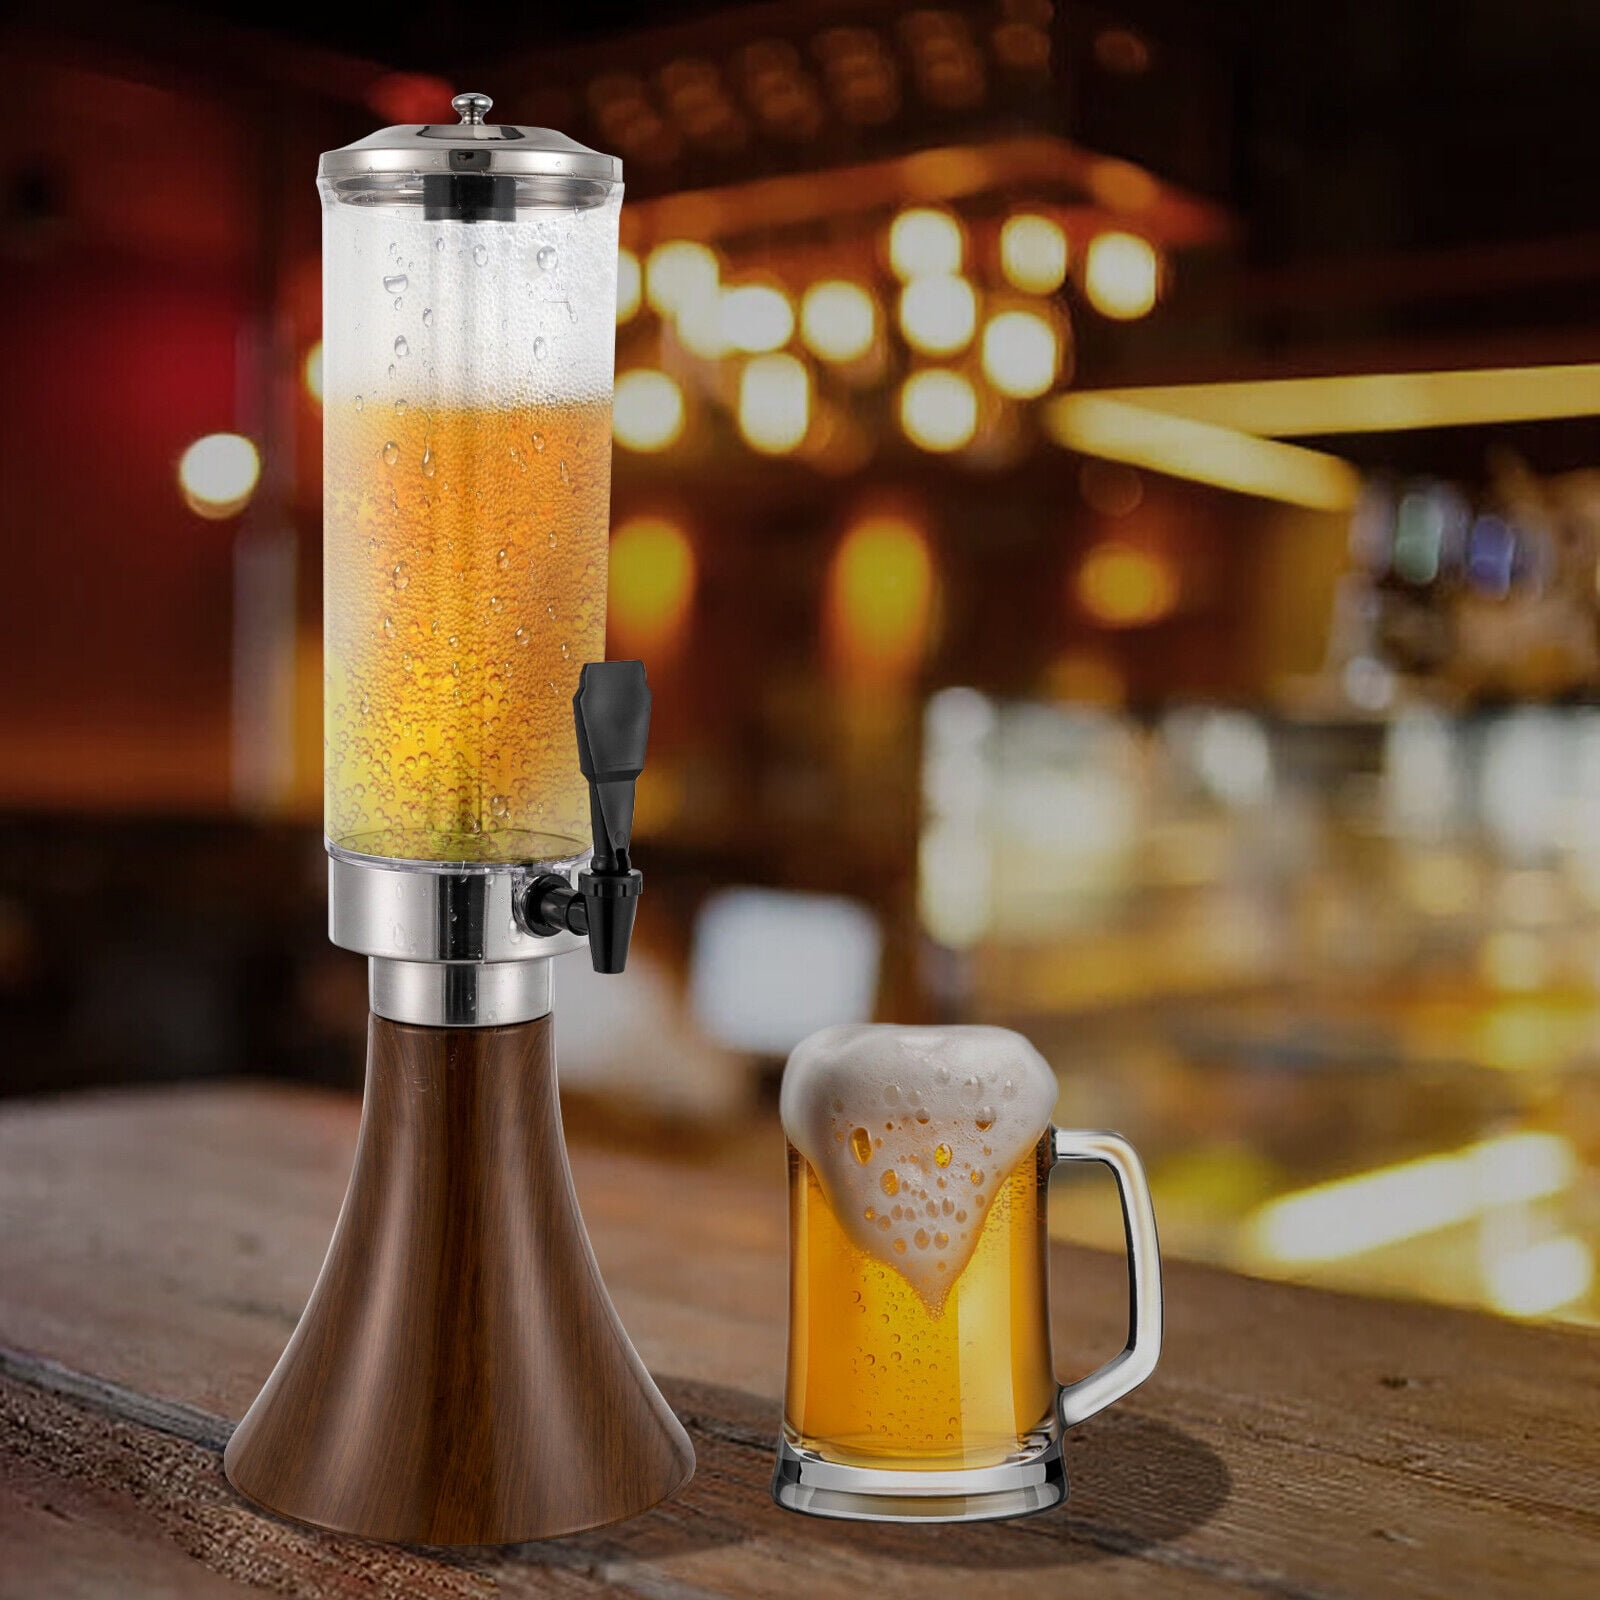 OUKANING 3L Beer Tower Dispenser Drink Container Wine Beer Milk Beverage  Tower Dispenser Tool w/3 Nozzle Bar Party 